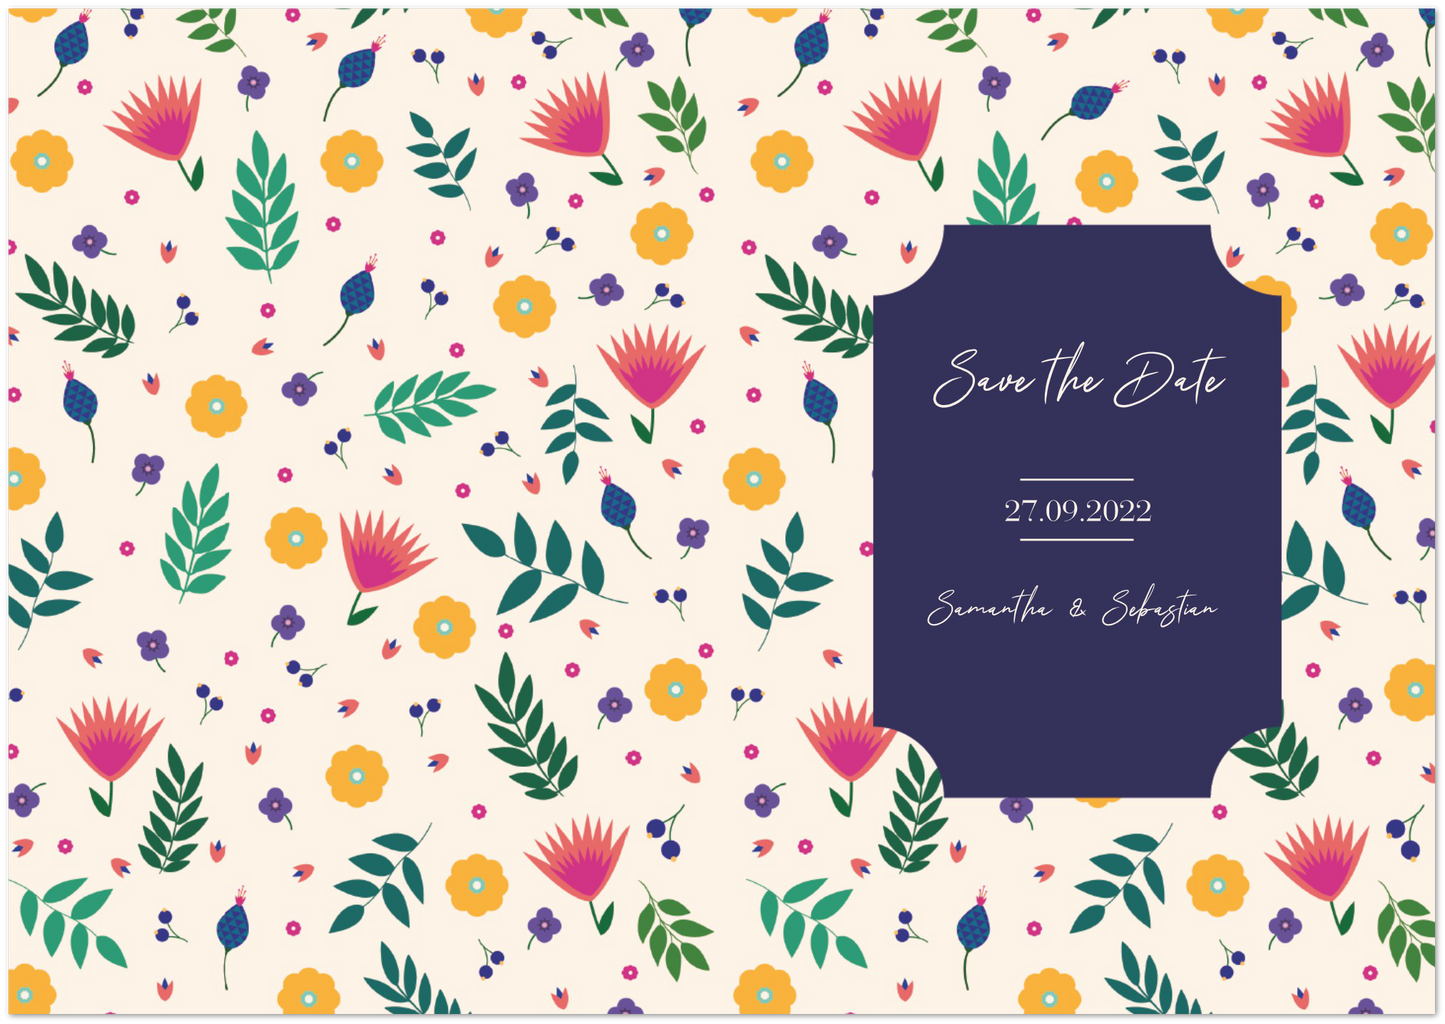 Playful and Cheeky Save the Date (sold as packs of 10 folded cards with white envelopes)